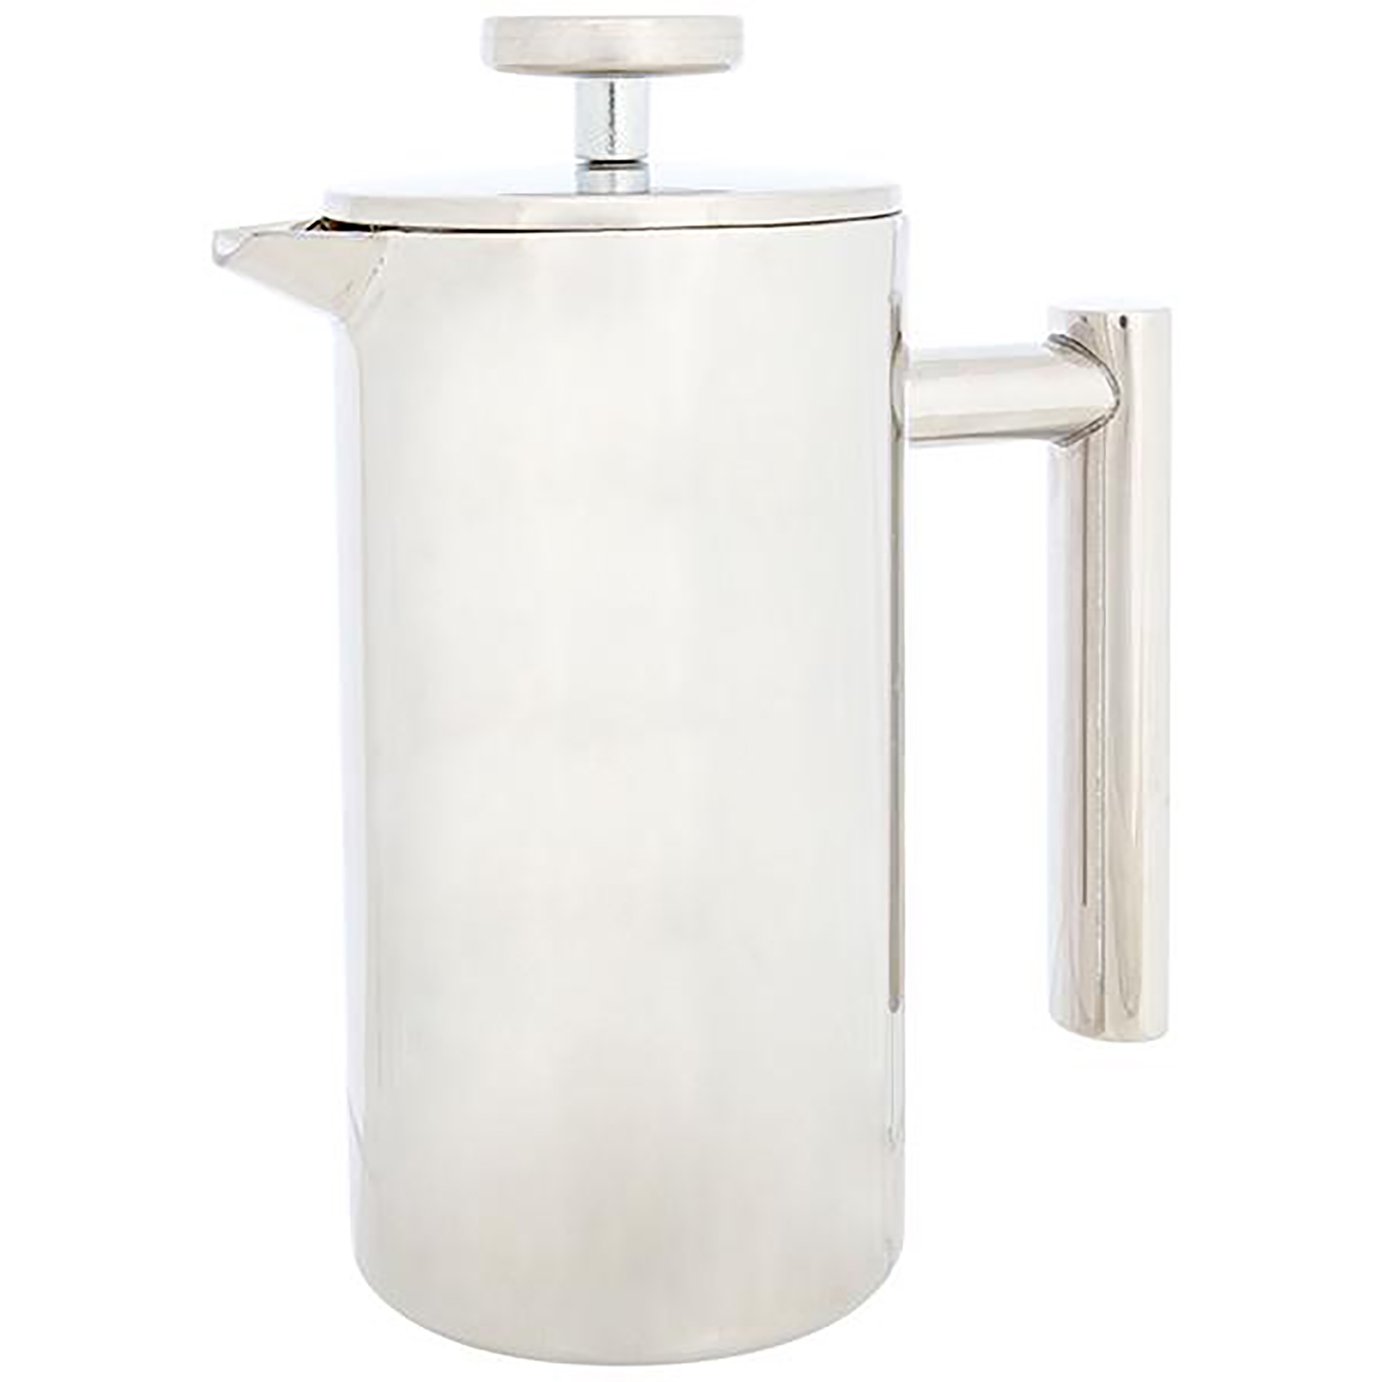 Habitat 3 Cup Double Walled 350ml Cafetiere - Silver